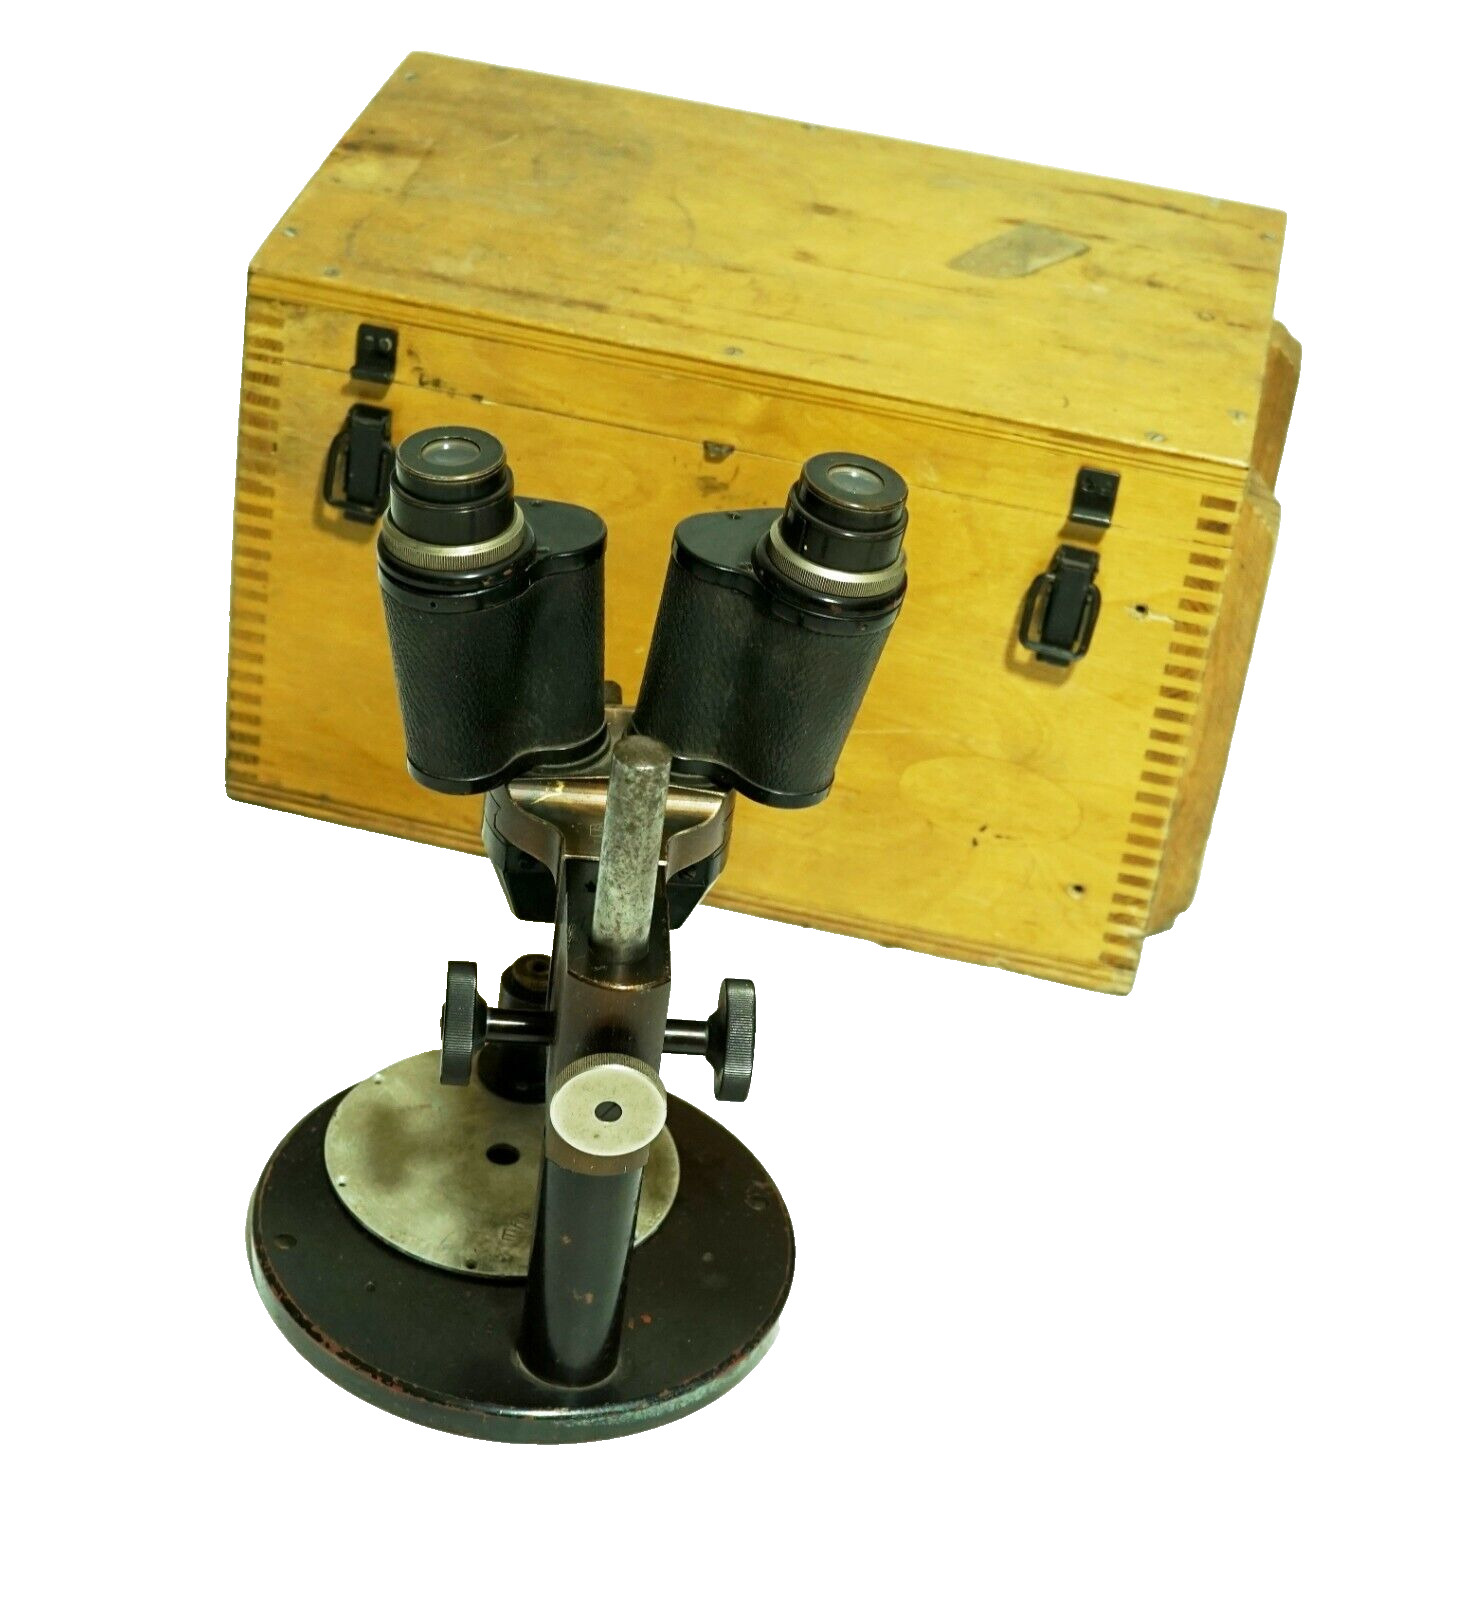 EARLY Vintage 1945 WWII Rare Germany stereo microscope Carl Zeiss Jena